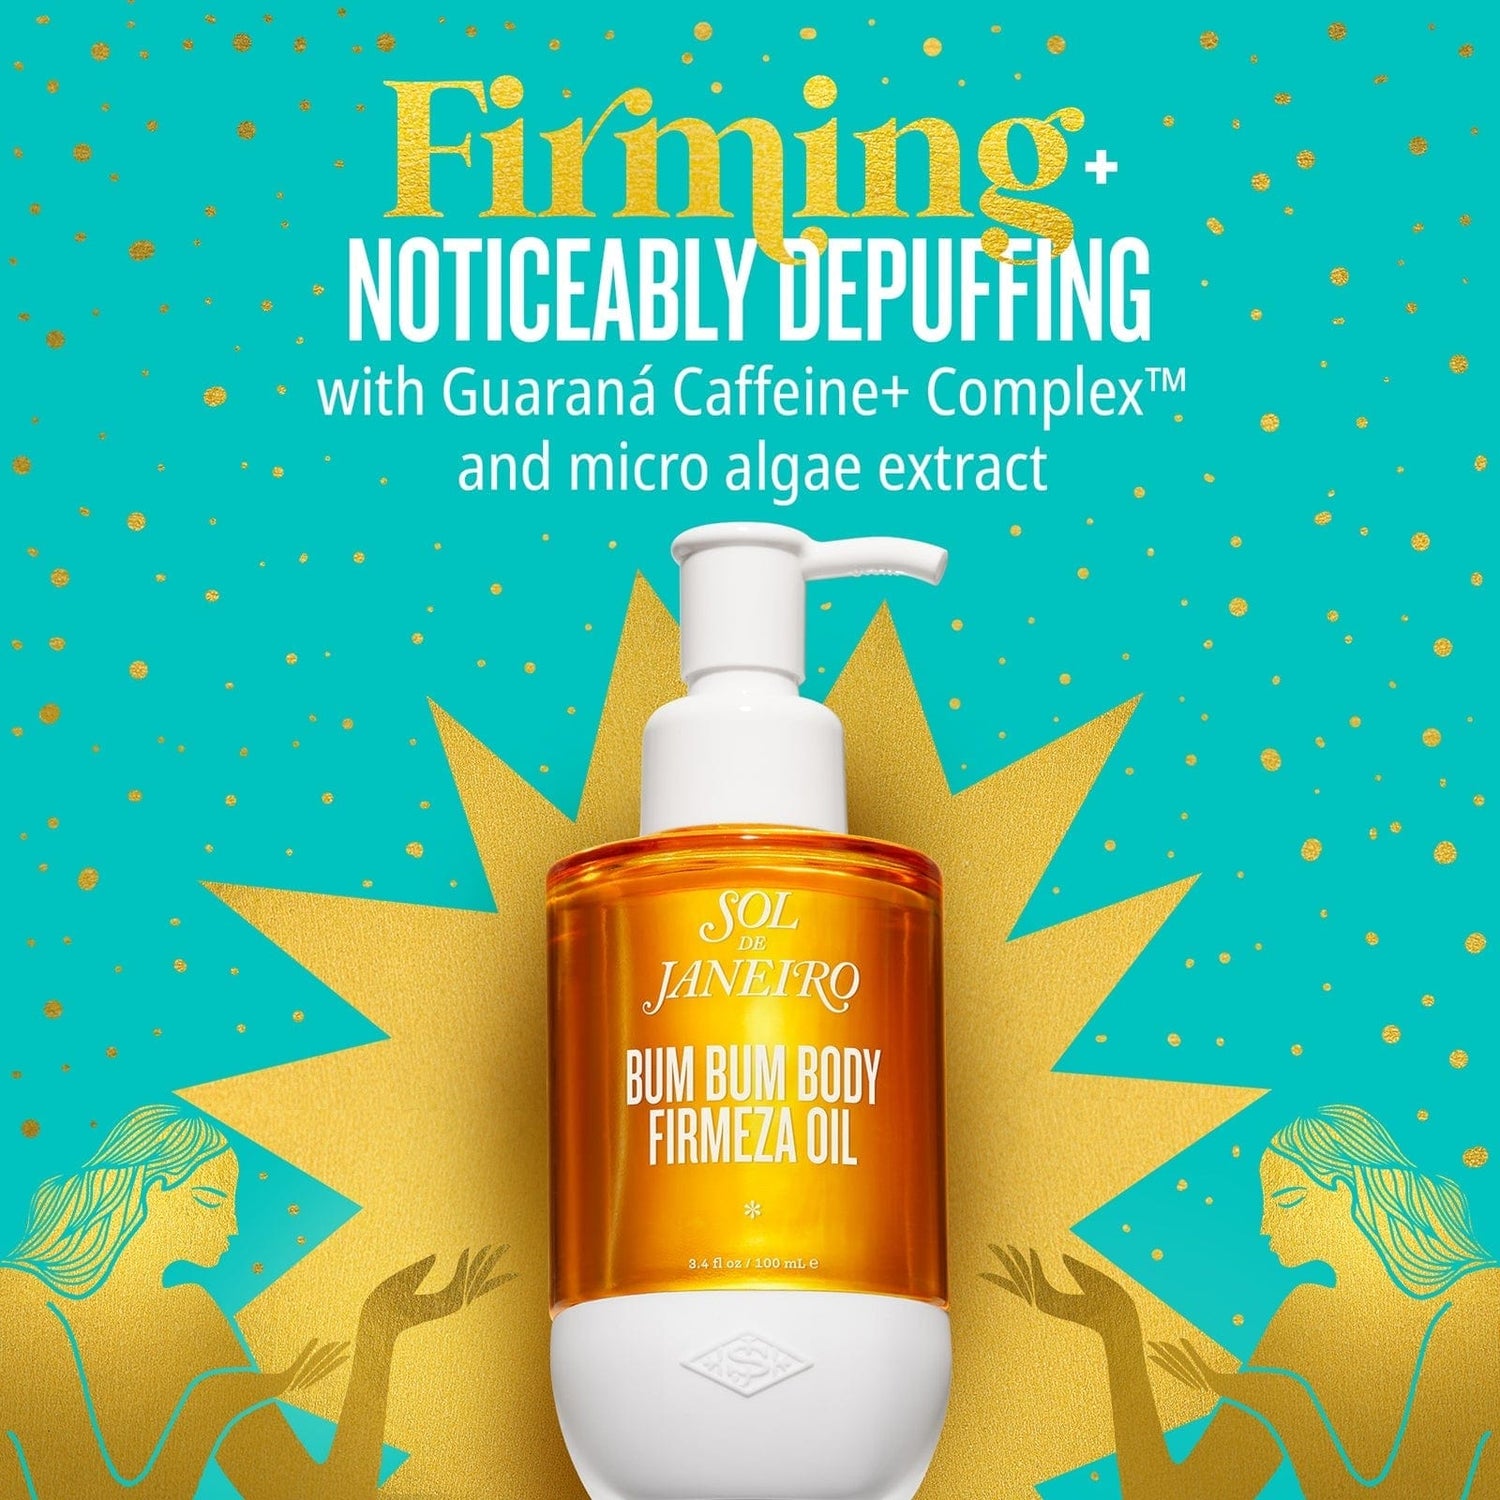 Firming noticeably depuffing with guarana caffeine + complex + micro algae extract